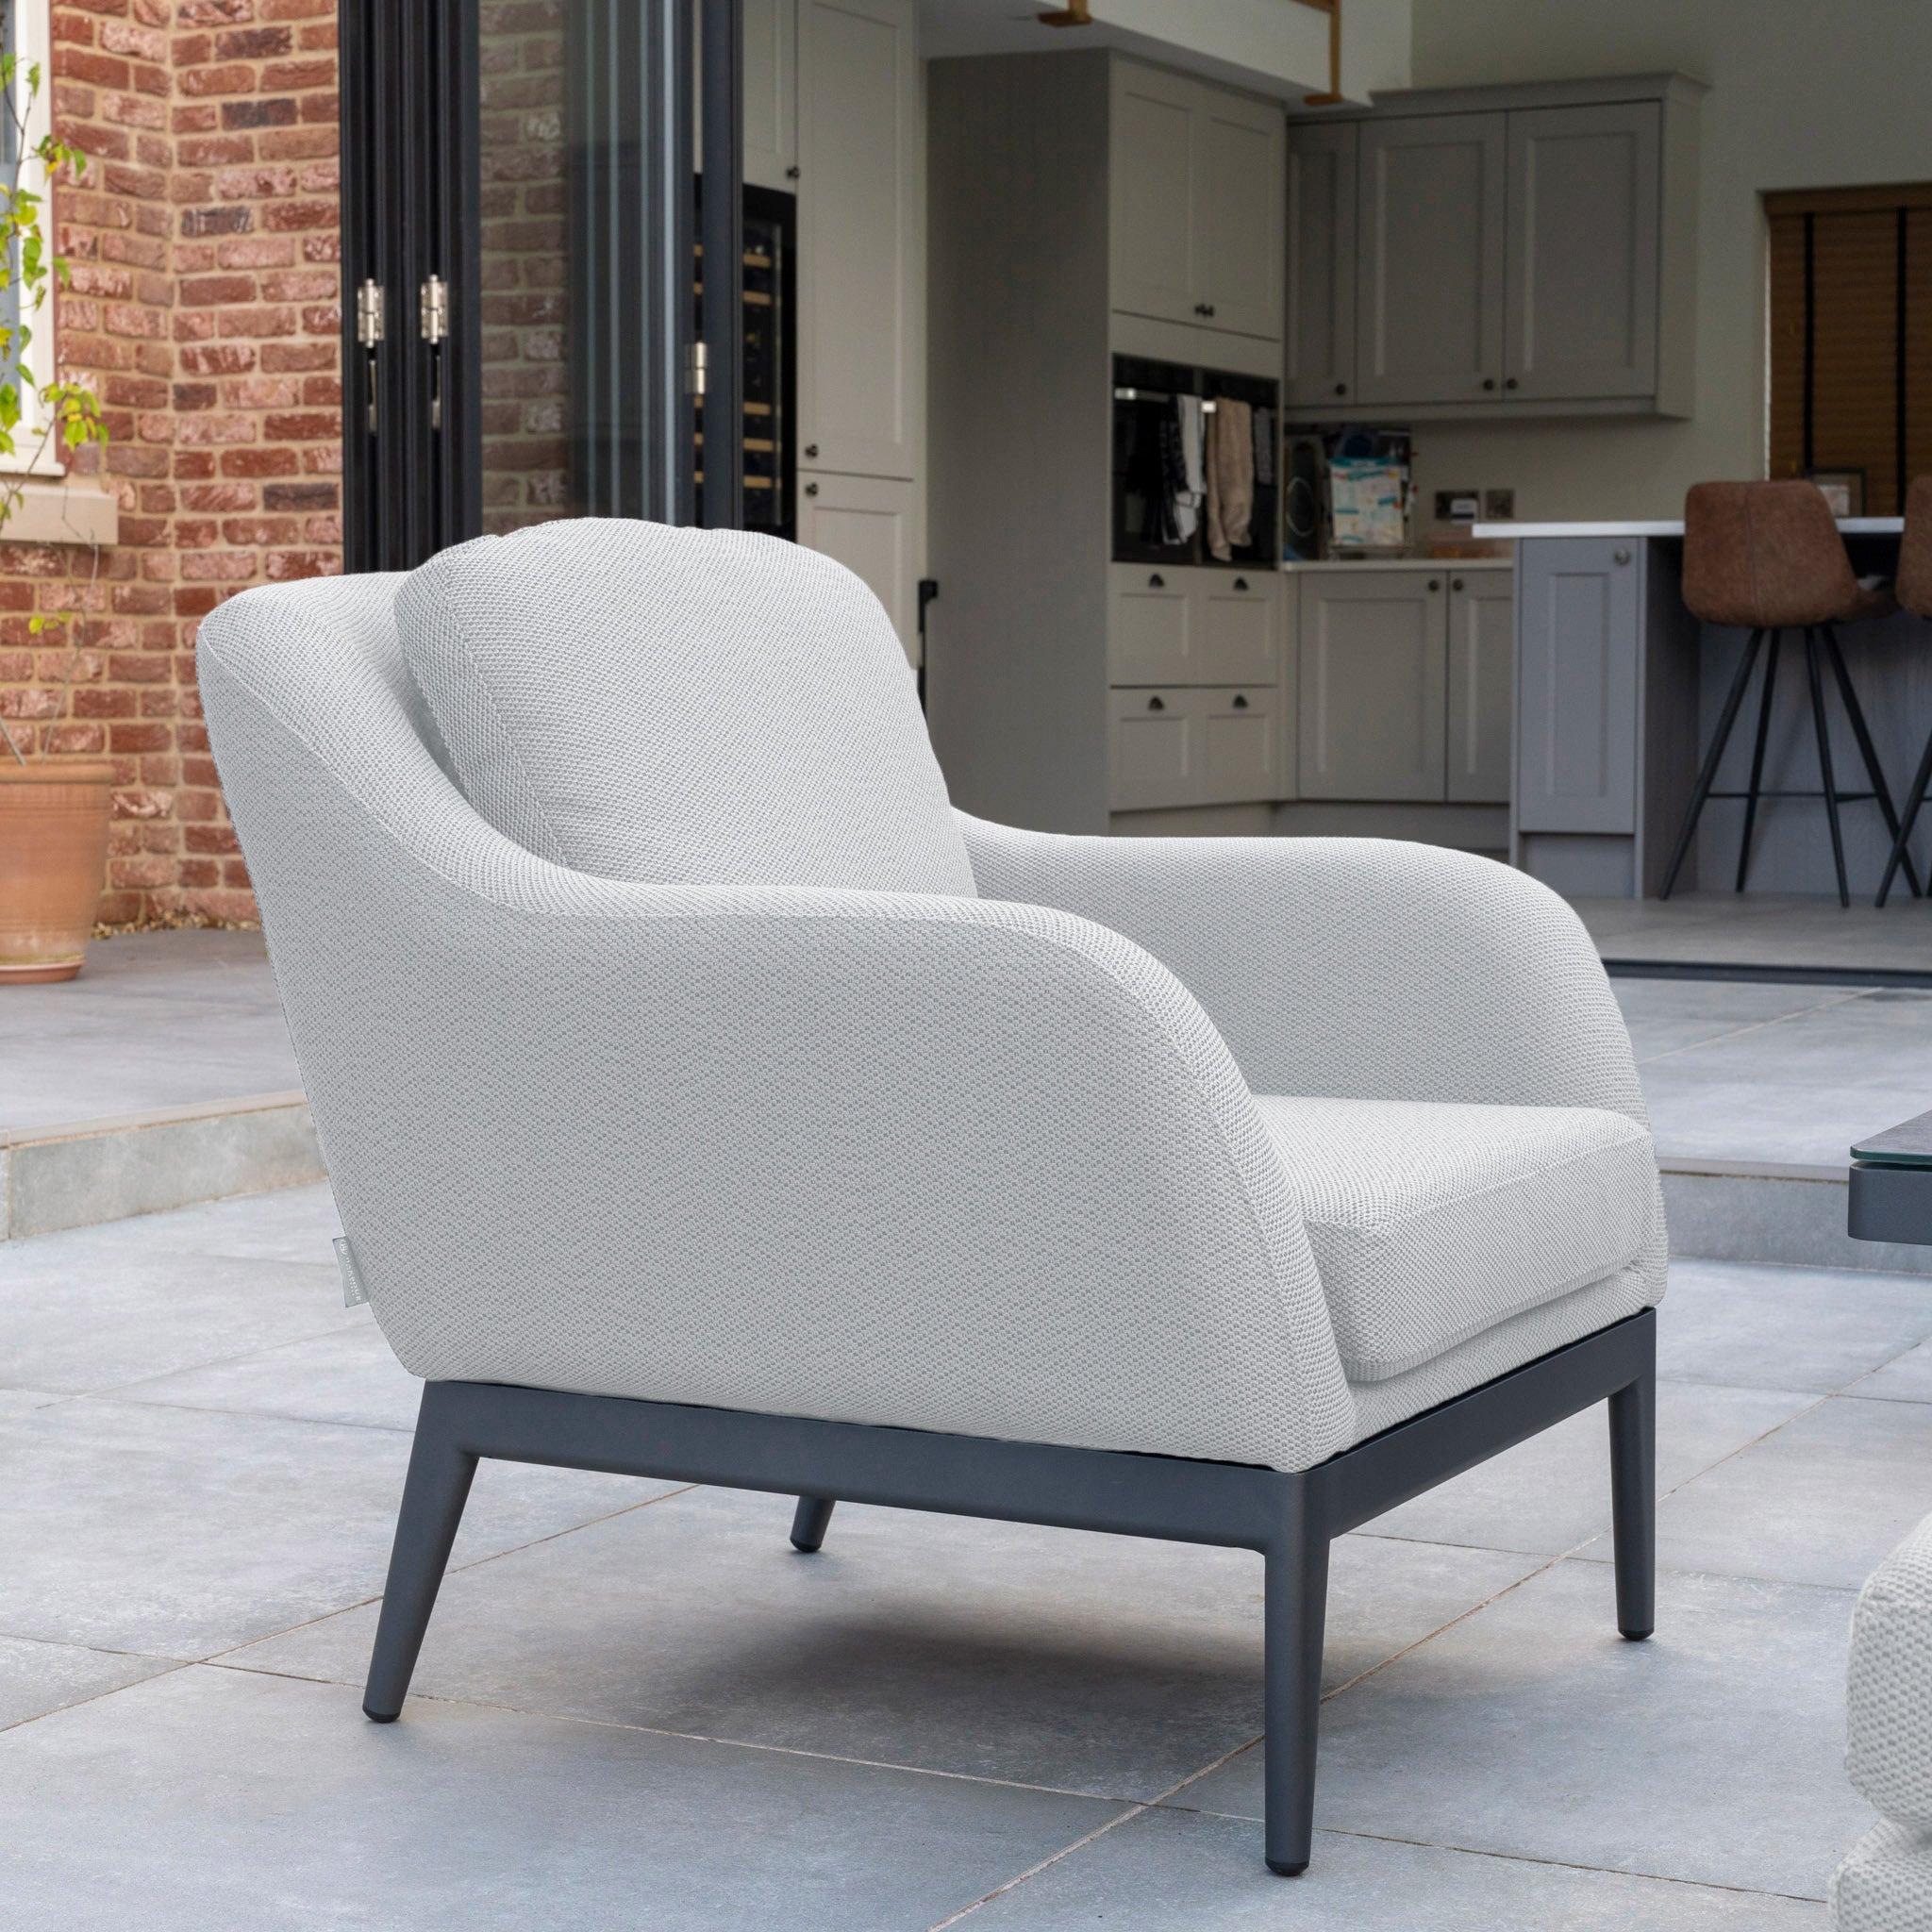 Luna 3 Seat Outdoor Fabric Sofa Set with Rising Table in Oyster Grey